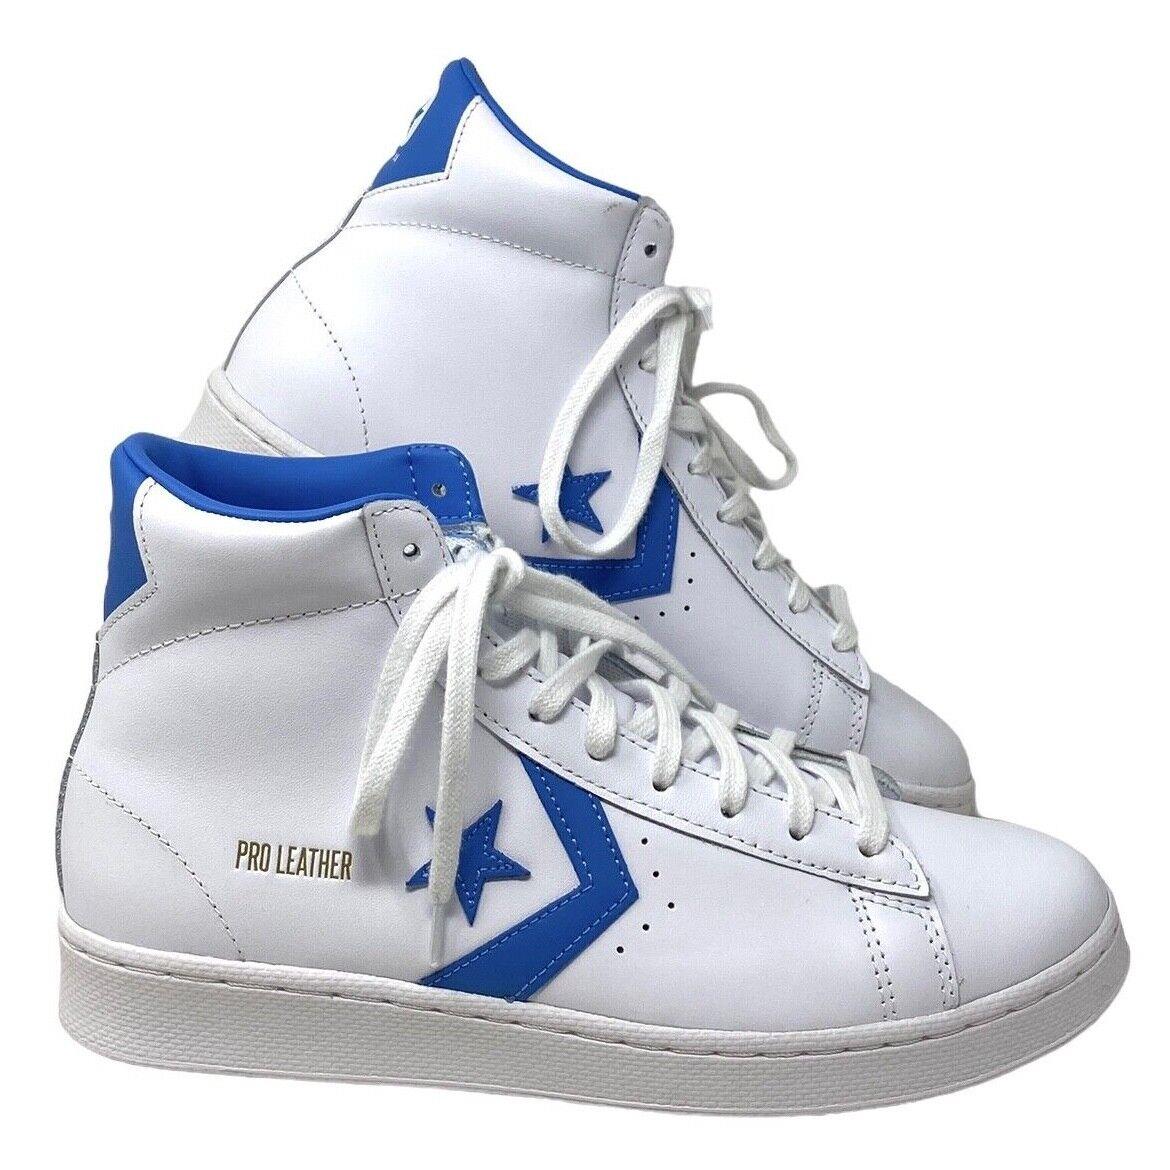 Converse Pro Leather High Top Sneakers Casual Shoe Women Size White Blue 166813C